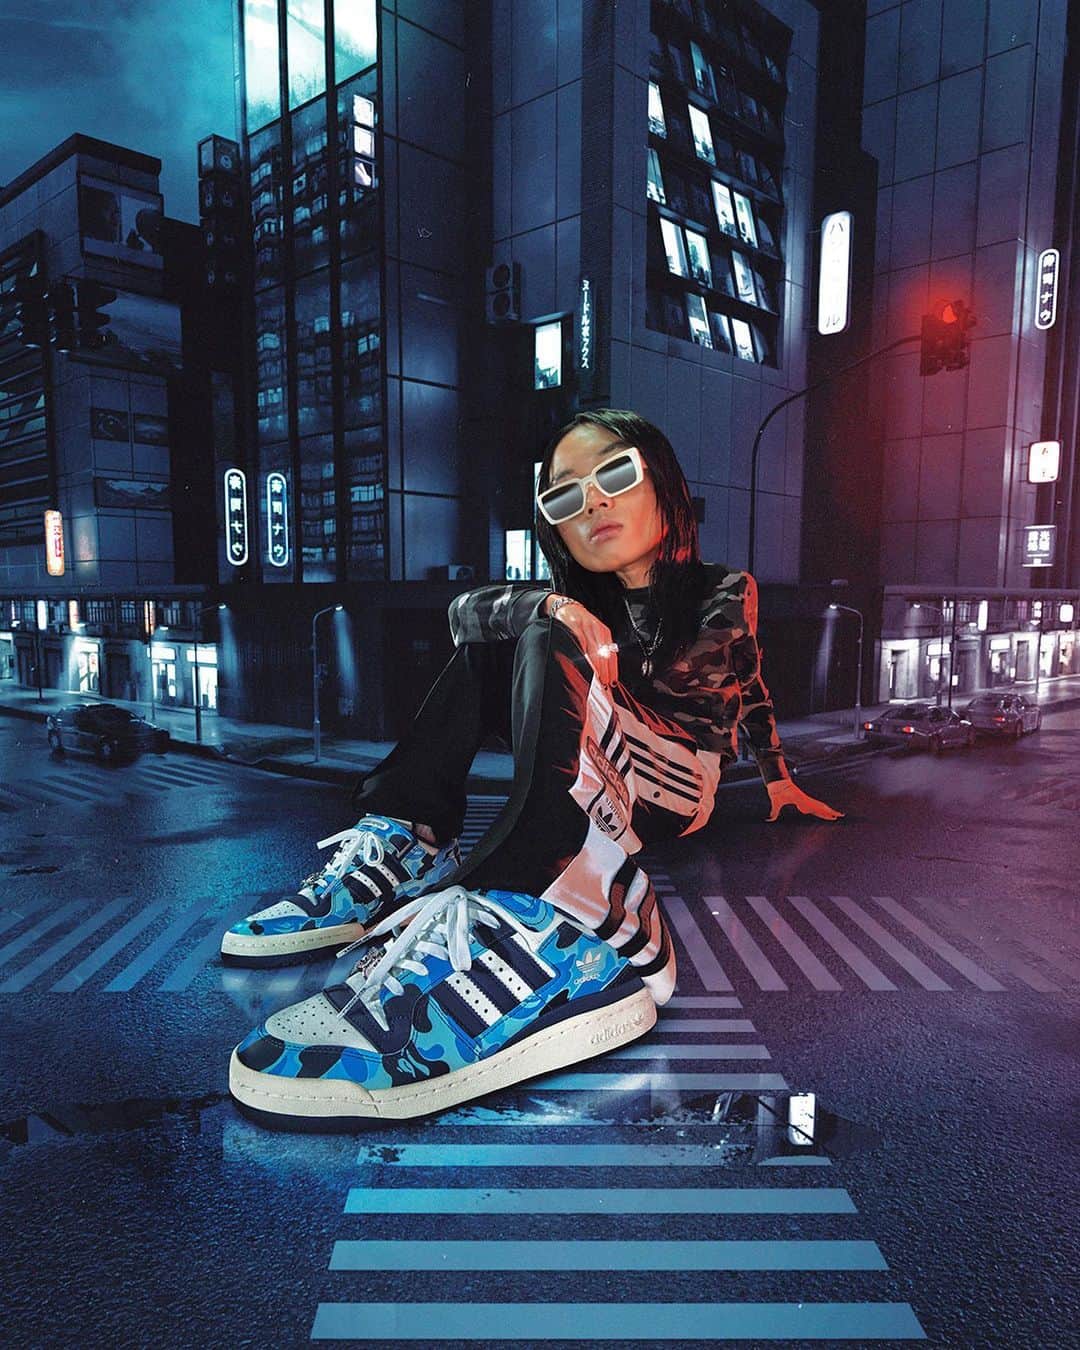 アトモスさんのインスタグラム写真 - (アトモスInstagram)「. アディダス オリジナルス (adidas Originals) は、ストリートカルチャーに大きな影響を与えてきたA BATHING APE®創業30周年、パートナーシップ20周年のアニバーサリーイヤーをセレブレイトするプロジェクトを展開。両ブランドの伝統を融合し再構築した「FORUM 84 BAPE® LOW (フォーラム 84 ベイプ ロウ)」を発売いたします。時を経ても色褪せないクラシックスニーカー「FORUM 84 LOW」をベースに、A BATHING APE®を象徴するオリジナルのカモ柄を、オーバーレイのスムースレザーやアンクルストラップ、ソックライナーカバーに施しました。 アンダーレイには、上質なホワイトのシボ革を使用しコントラストをつけることで、より深みをひき出しています。両ブランドのアイコニックなカラー、グリーンとブルーを採用した、特別感あふれる1足です。シュータンとシュージュエルに配した30周年特別仕様のオリジナルロゴには、ゴールドとシルバーをそれぞれ採用し、本プロジェクトのスペシャル感あふれるディテールを散りばめました。 本商品は現在atmos-tokyo.comにて抽選受付中。5月20日(土)よりA.T.A.D、atmos 各店（一部店舗除く）、atmos オンラインにて発売致します。  We will release “FORUM 84 BAPE® LOW”, which combines and reconstructs the traditions of both brands. Based on the classic sneaker "FORUM 84 LOW" that does not fade over time, the original camo pattern that symbolizes A BATHING APE® is applied to the overlay smooth leather, ankle strap, and sockliner cover. The underlay is made of high-quality white grained leather to create a contrast that brings out more depth. The iconic colors of both brands, green and blue, make this a special pair. The 30th anniversary special original logos on the tongue and shoe jewels are gold and silver, respectively, and the special details of this project are scattered. This product is currently accepting lotteries at atmos-tokyo.com. It will be on sale at A.T.A.D, atmos stores (excluding some stores), and atmos online from Saturday, May 20th.  #atmos#adidas#ABATHINGAPE」5月17日 19時07分 - atmos_japan